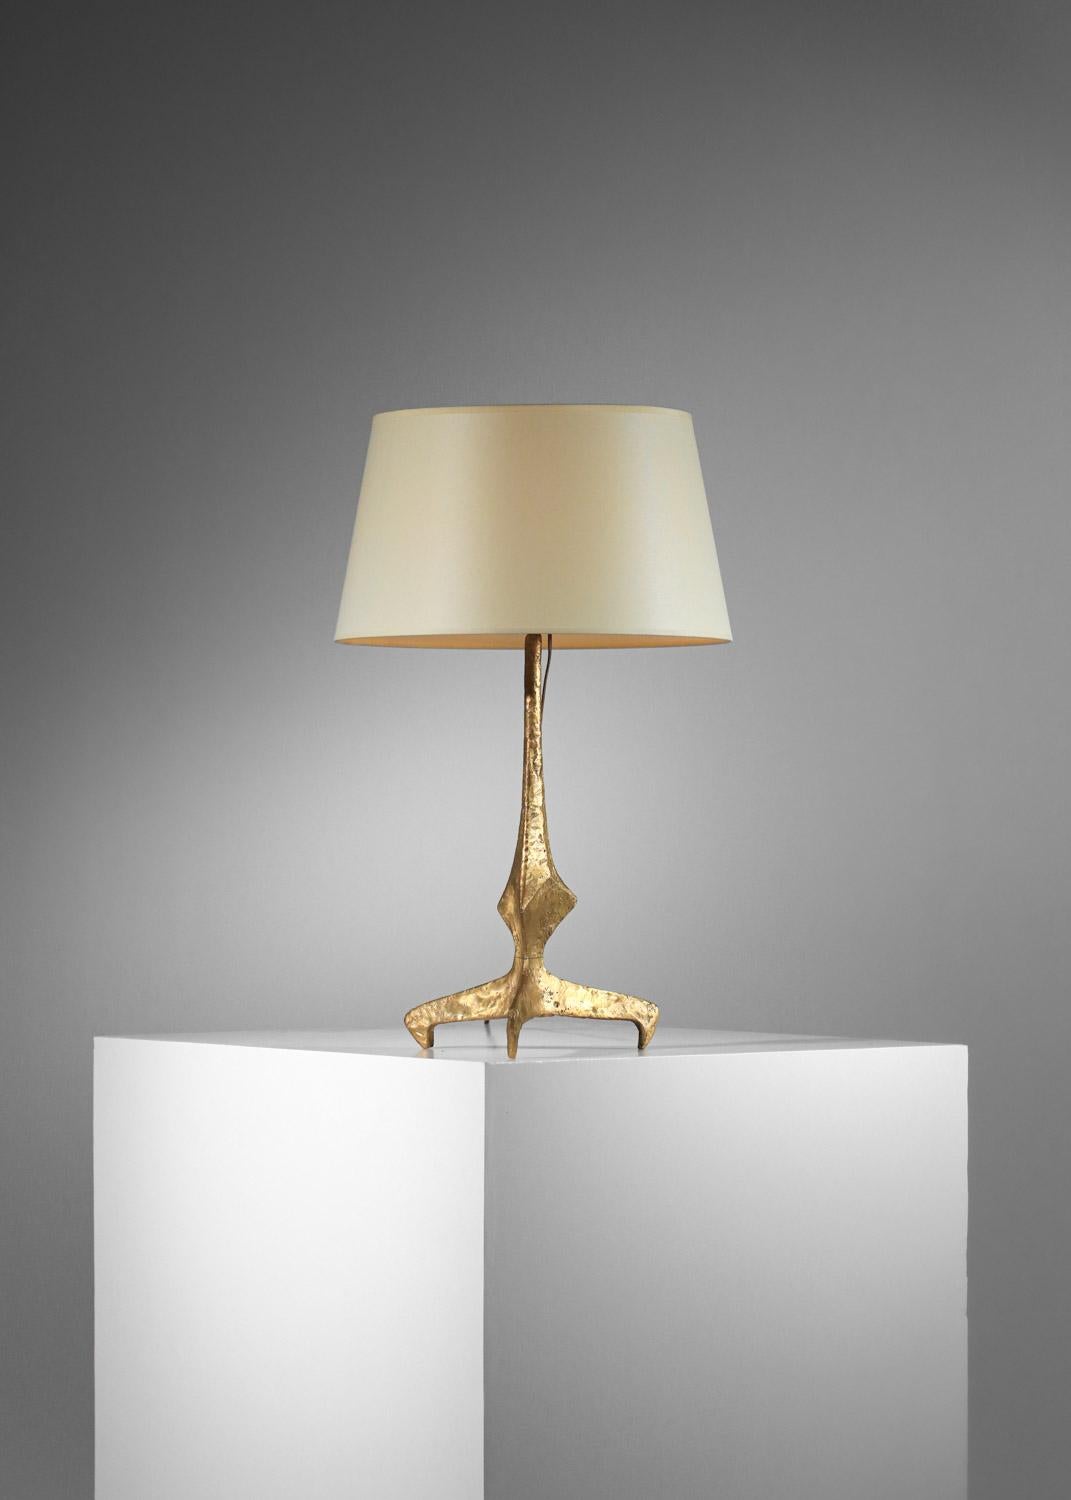 Gilt bronze table lamp in the Felix Agostini style, tripod-shaped  For Sale 7